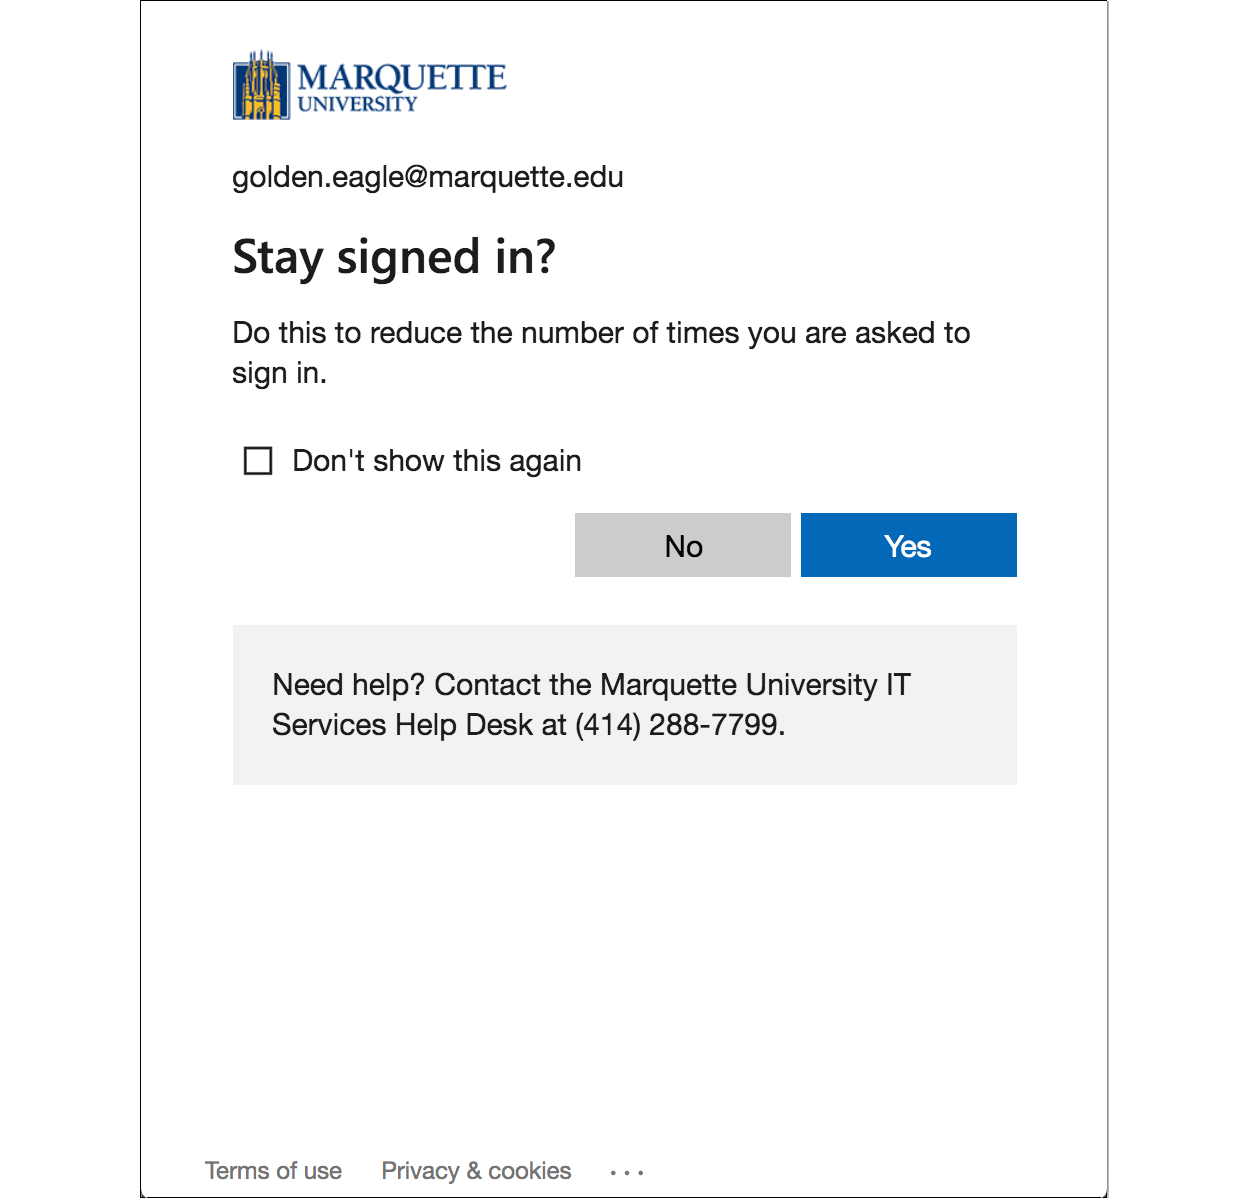 Stay signed in prompt: Yes or No